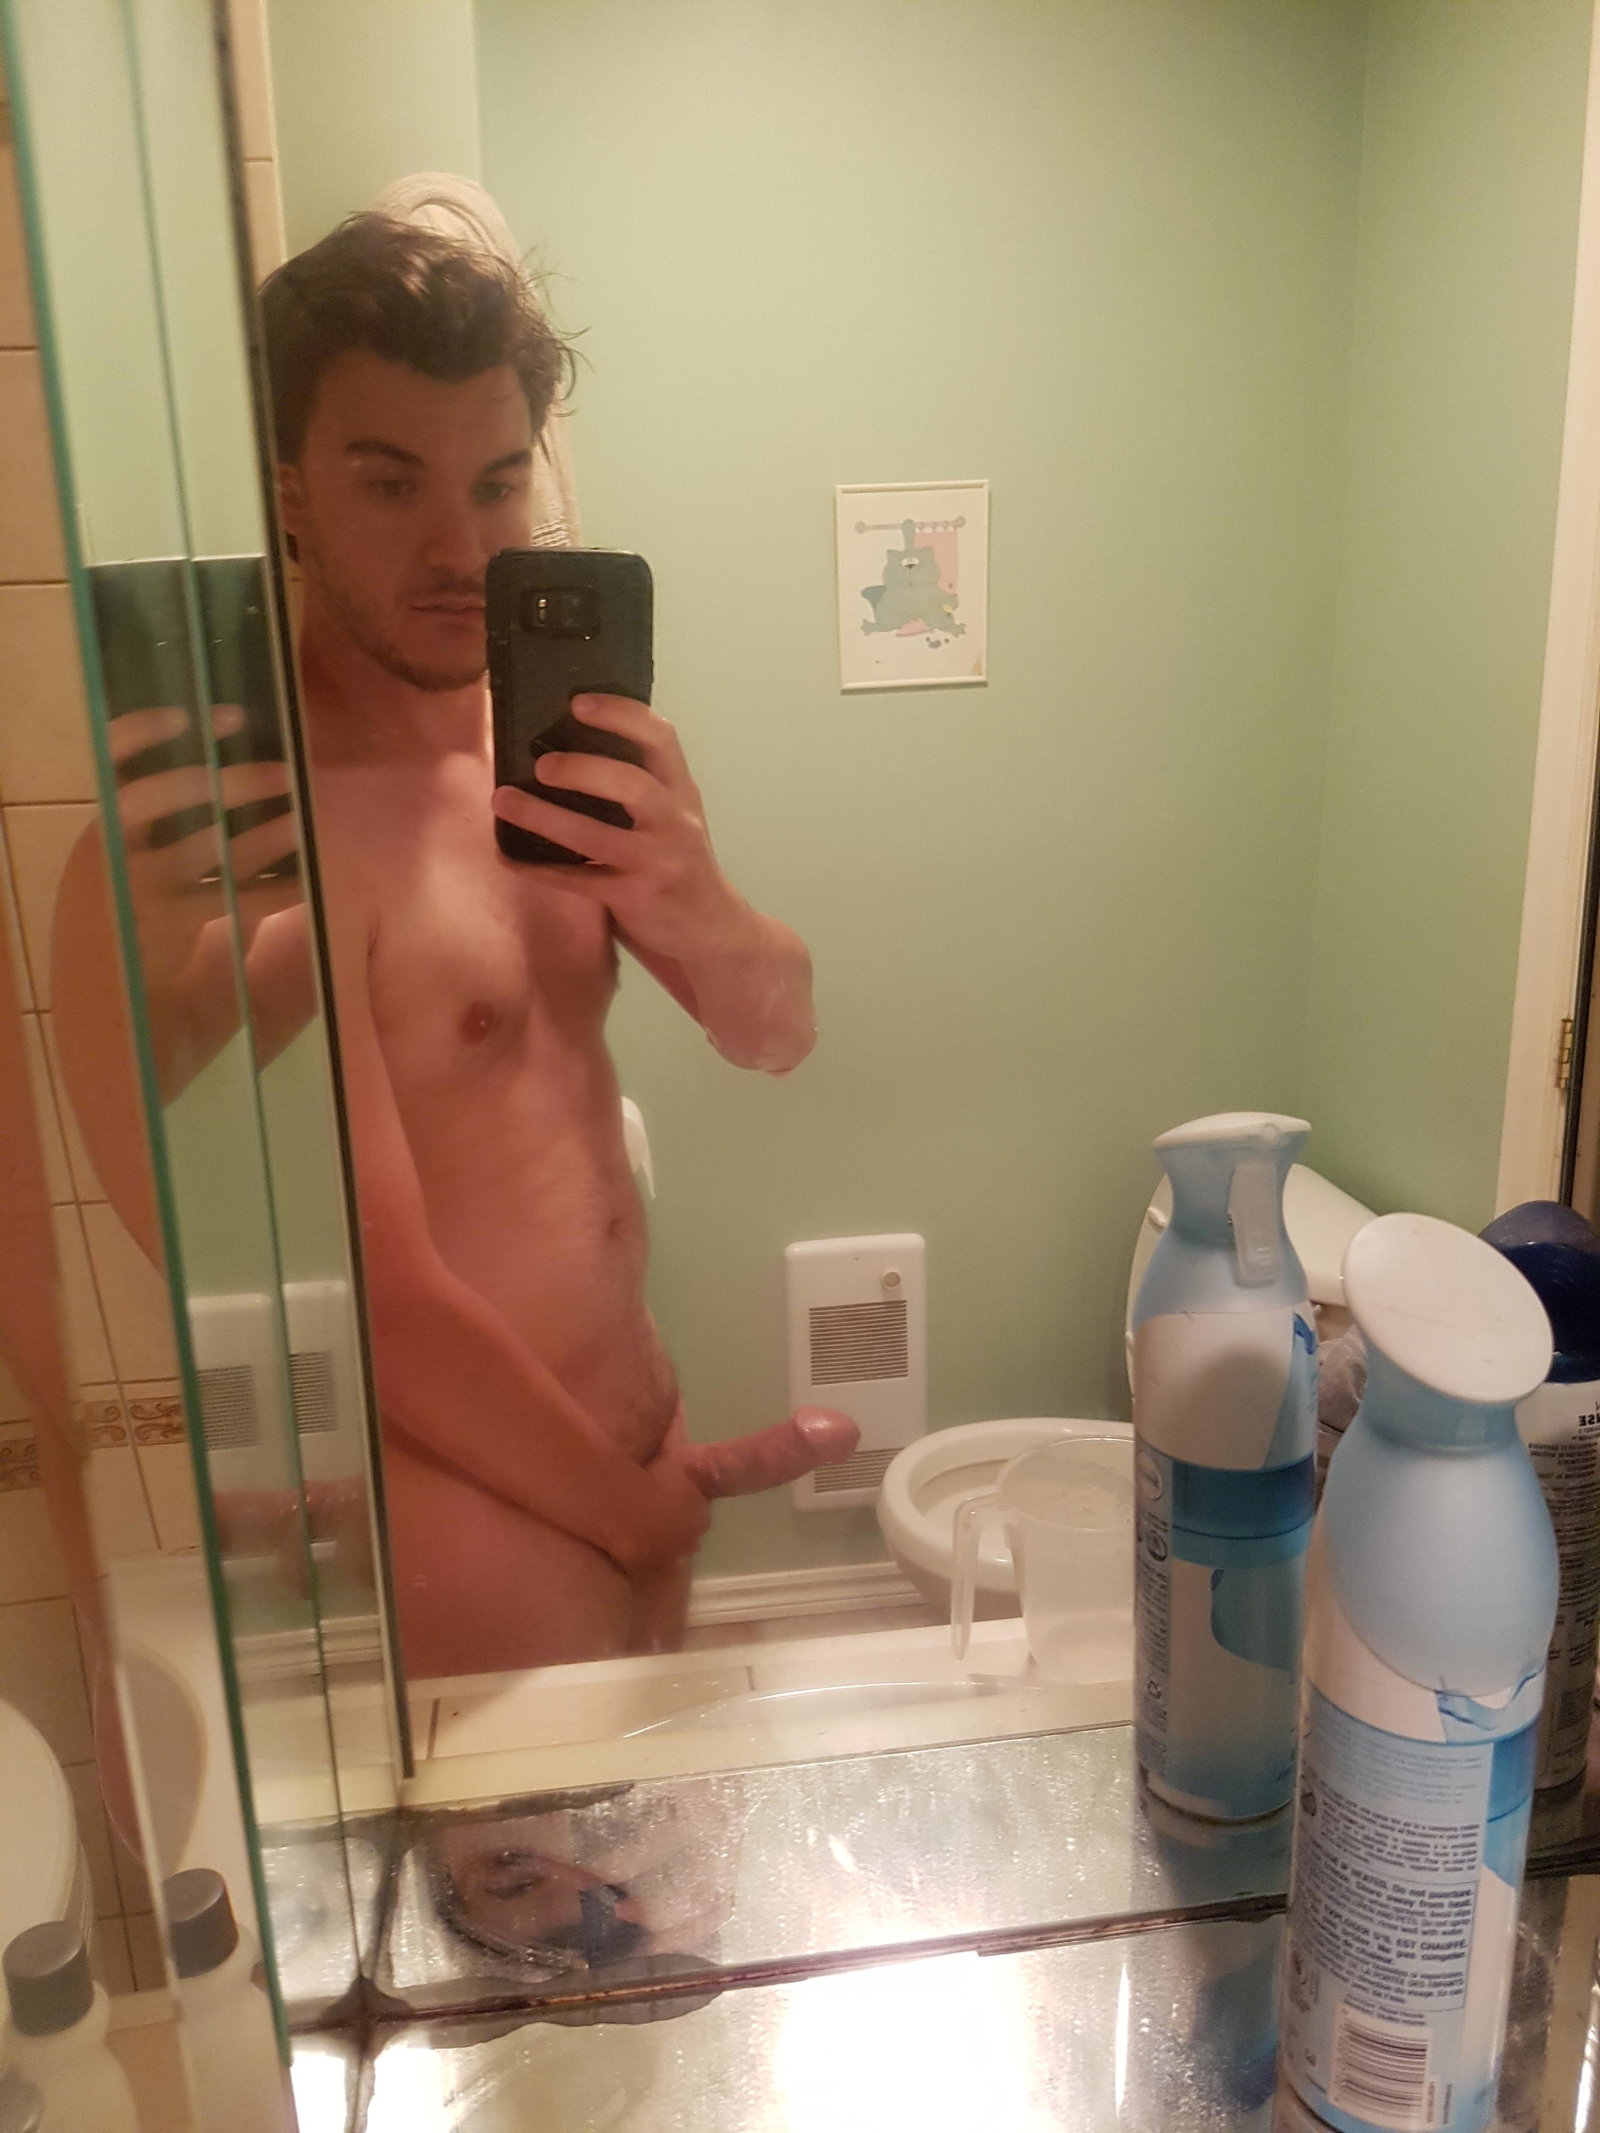 Photo by Mjak1231 with the username @Mjak1231, who is a verified user,  December 17, 2018 at 11:03 PM. The post is about the topic Show your DICK and the text says 'Having some fun'